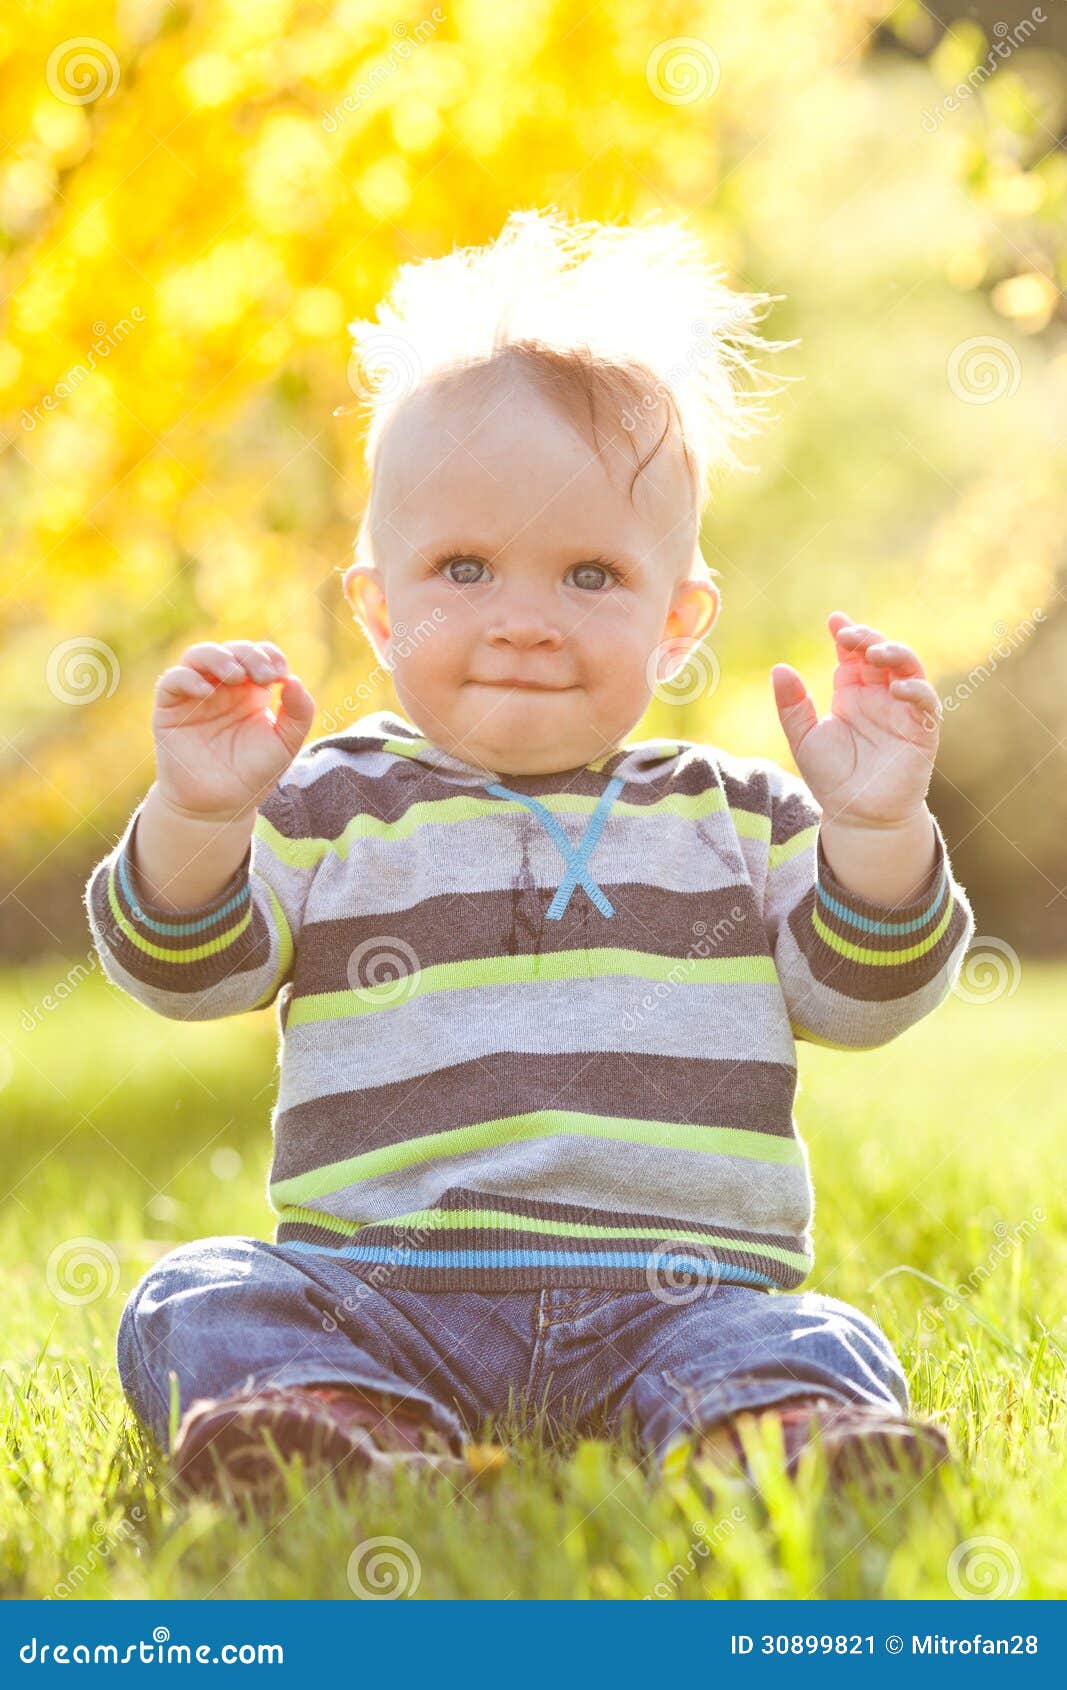 Cute child in sun stock image. Image of adorable, childhood - 30899821